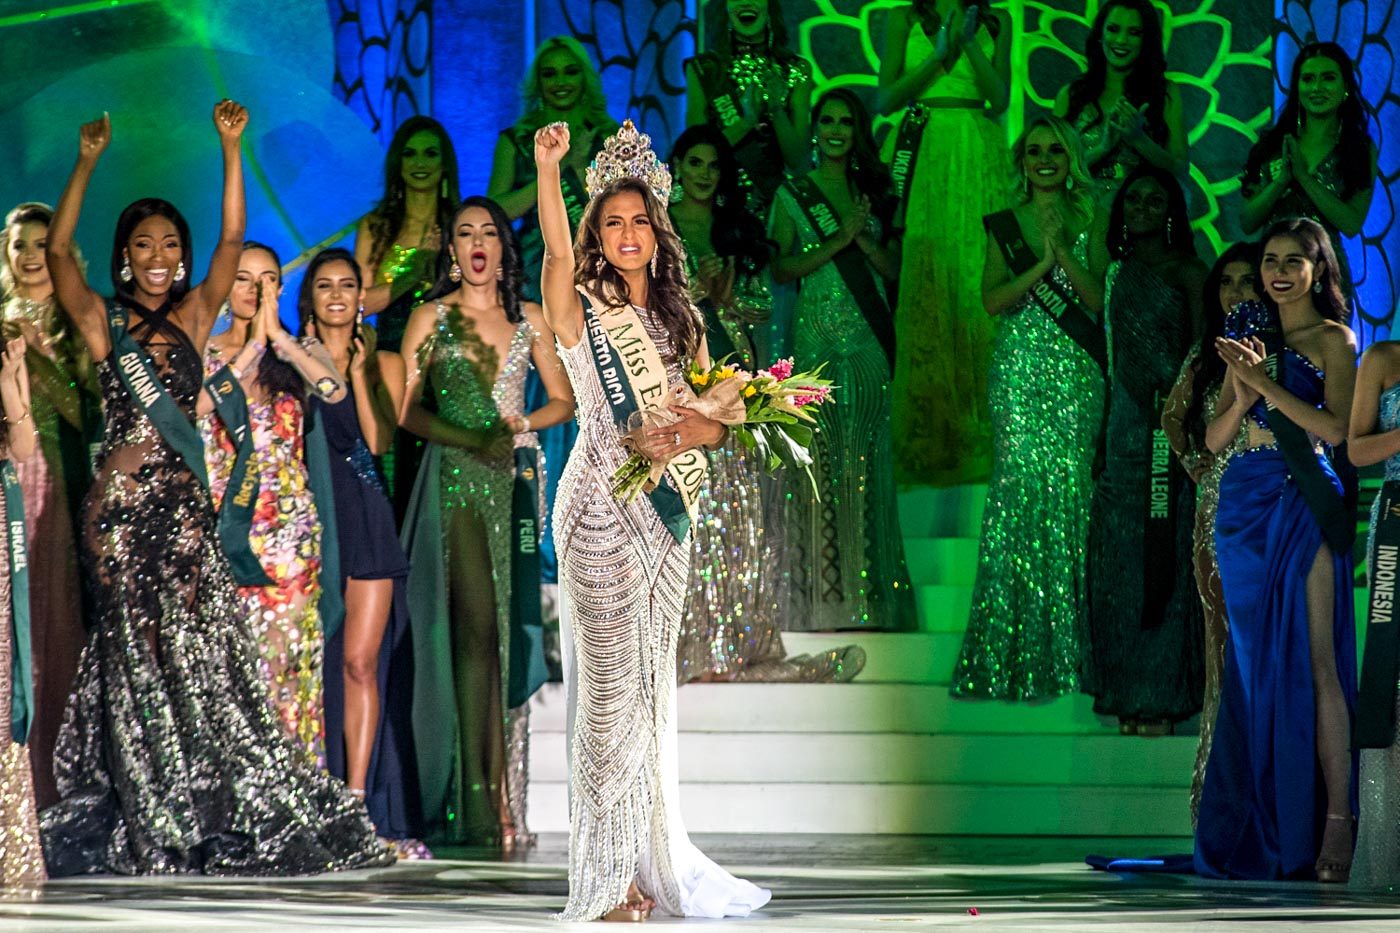 Who is Nellys Pimentel, Miss Earth 2019?